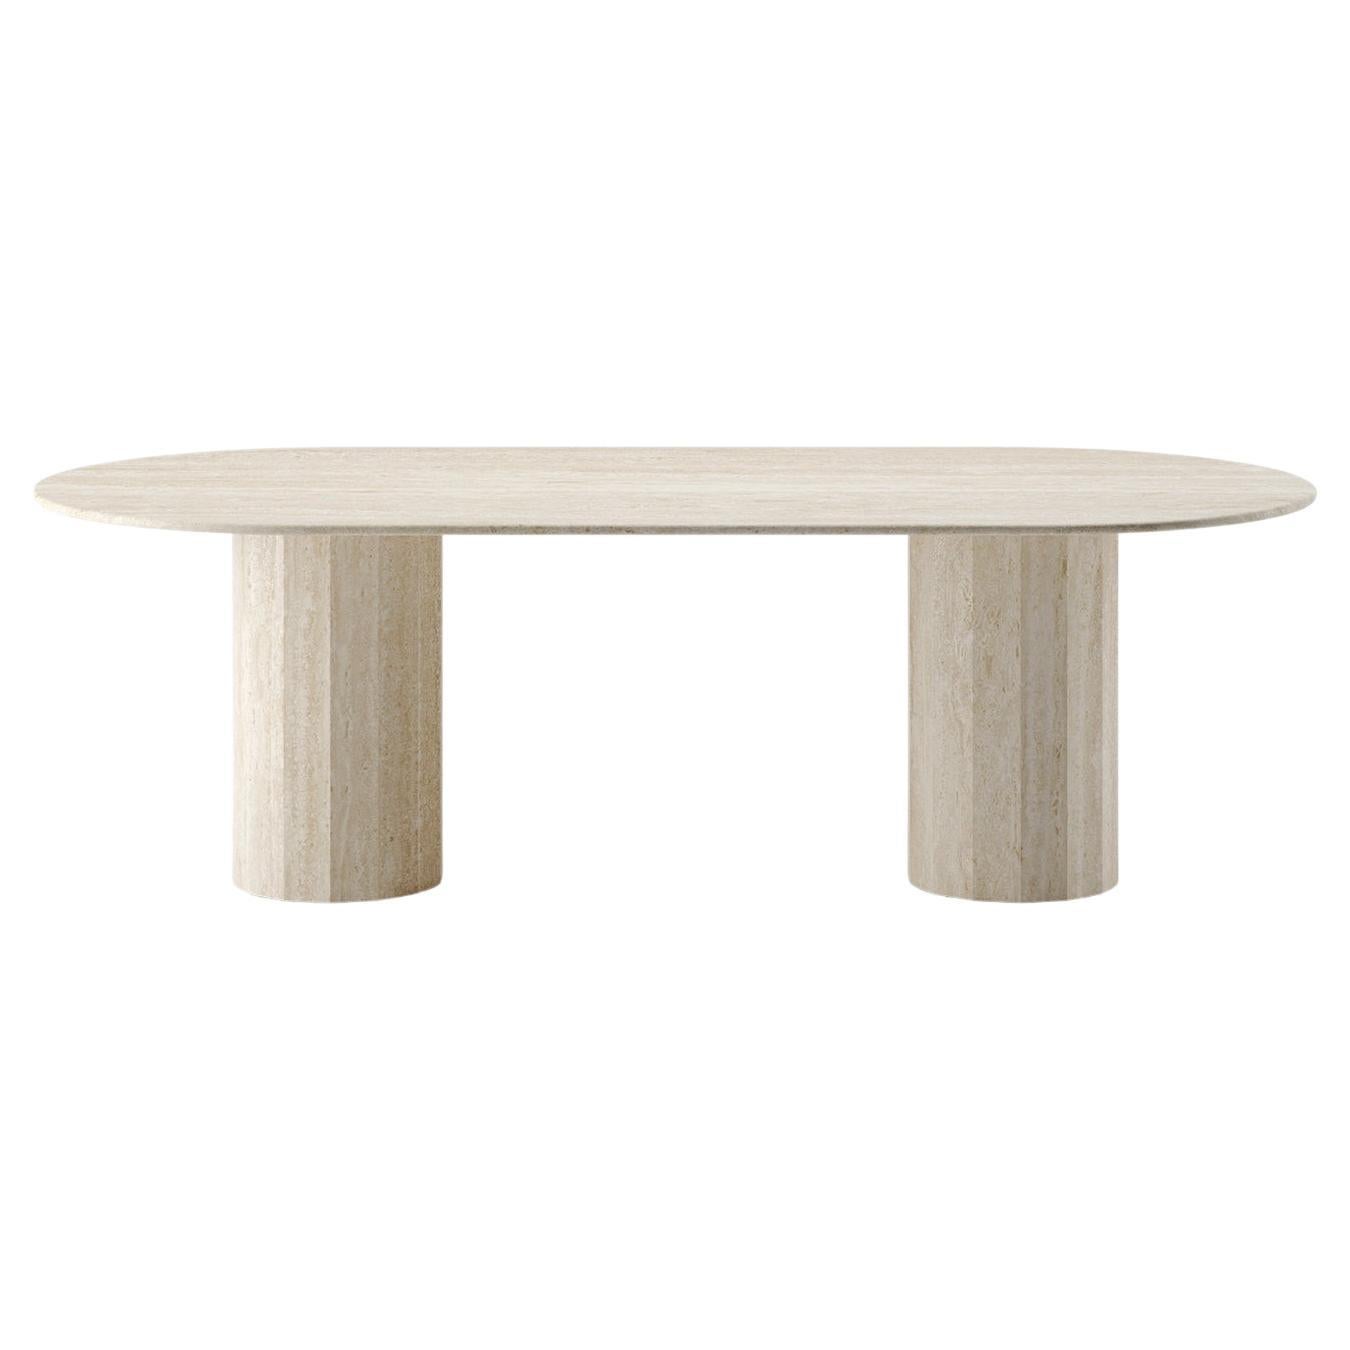 Ashby Oval Dining Table in Honed Travertine